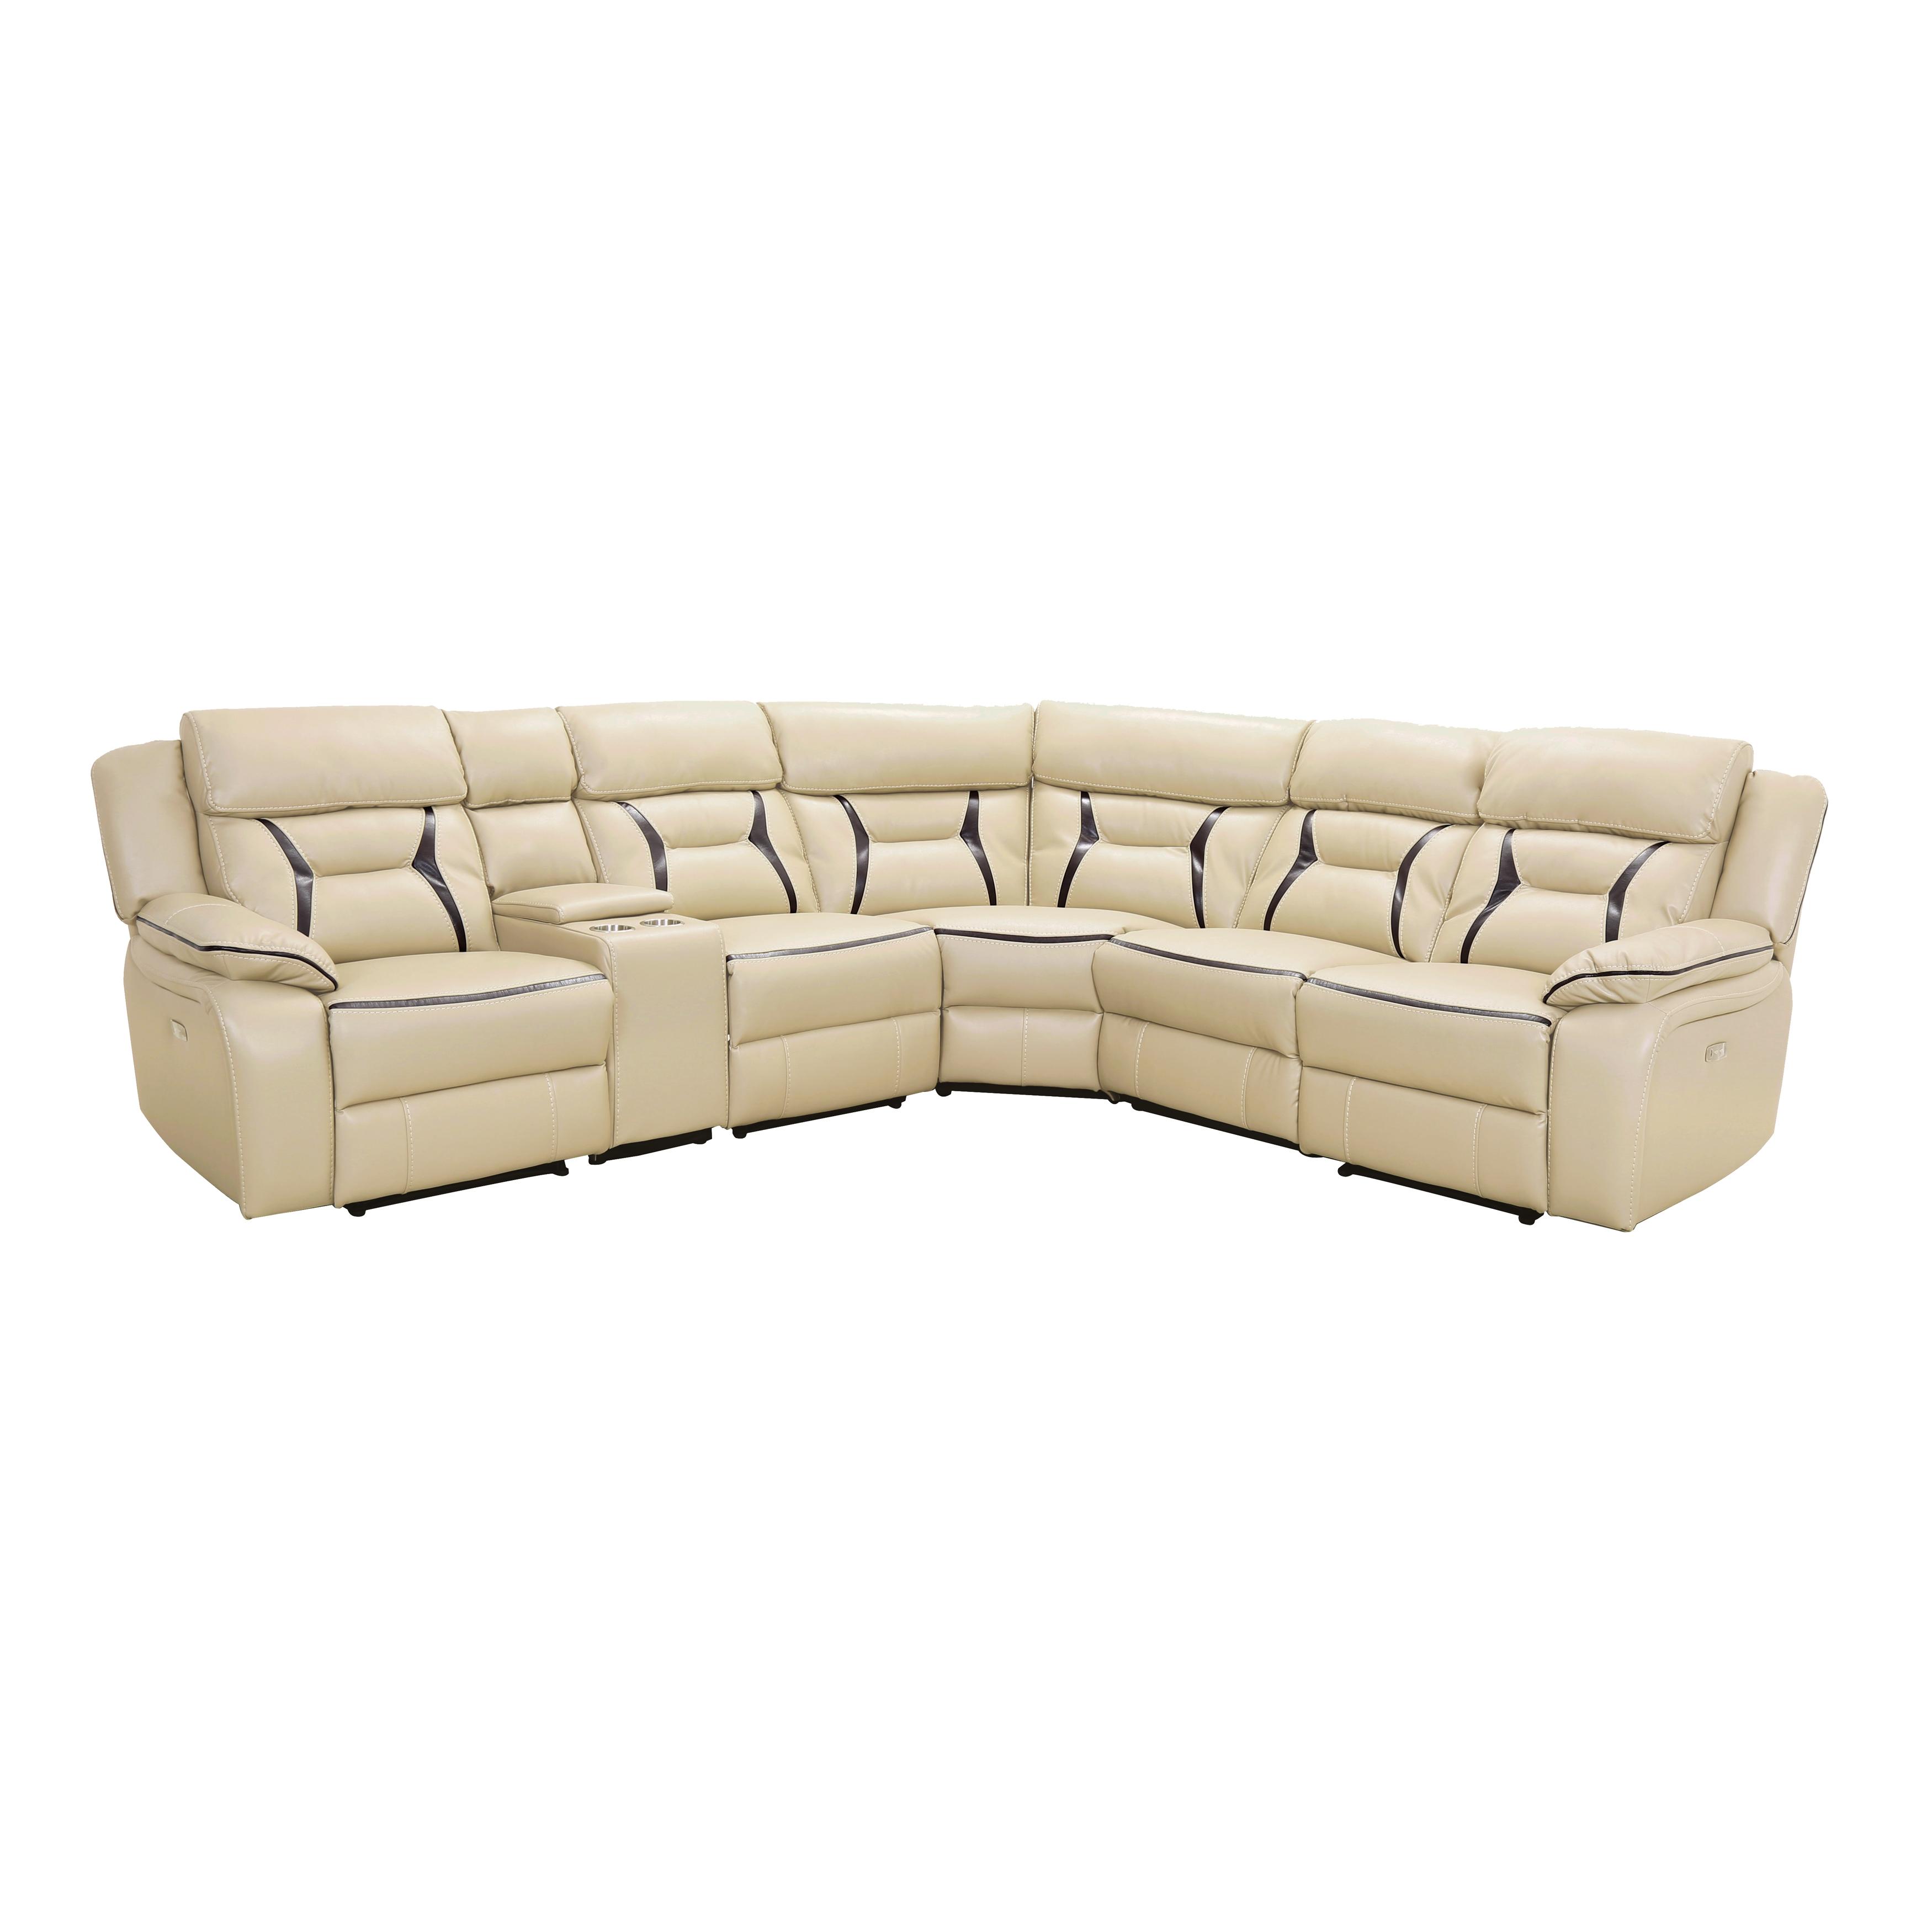 Homelegance 8229*6PW Amite Power Reclining Sectional